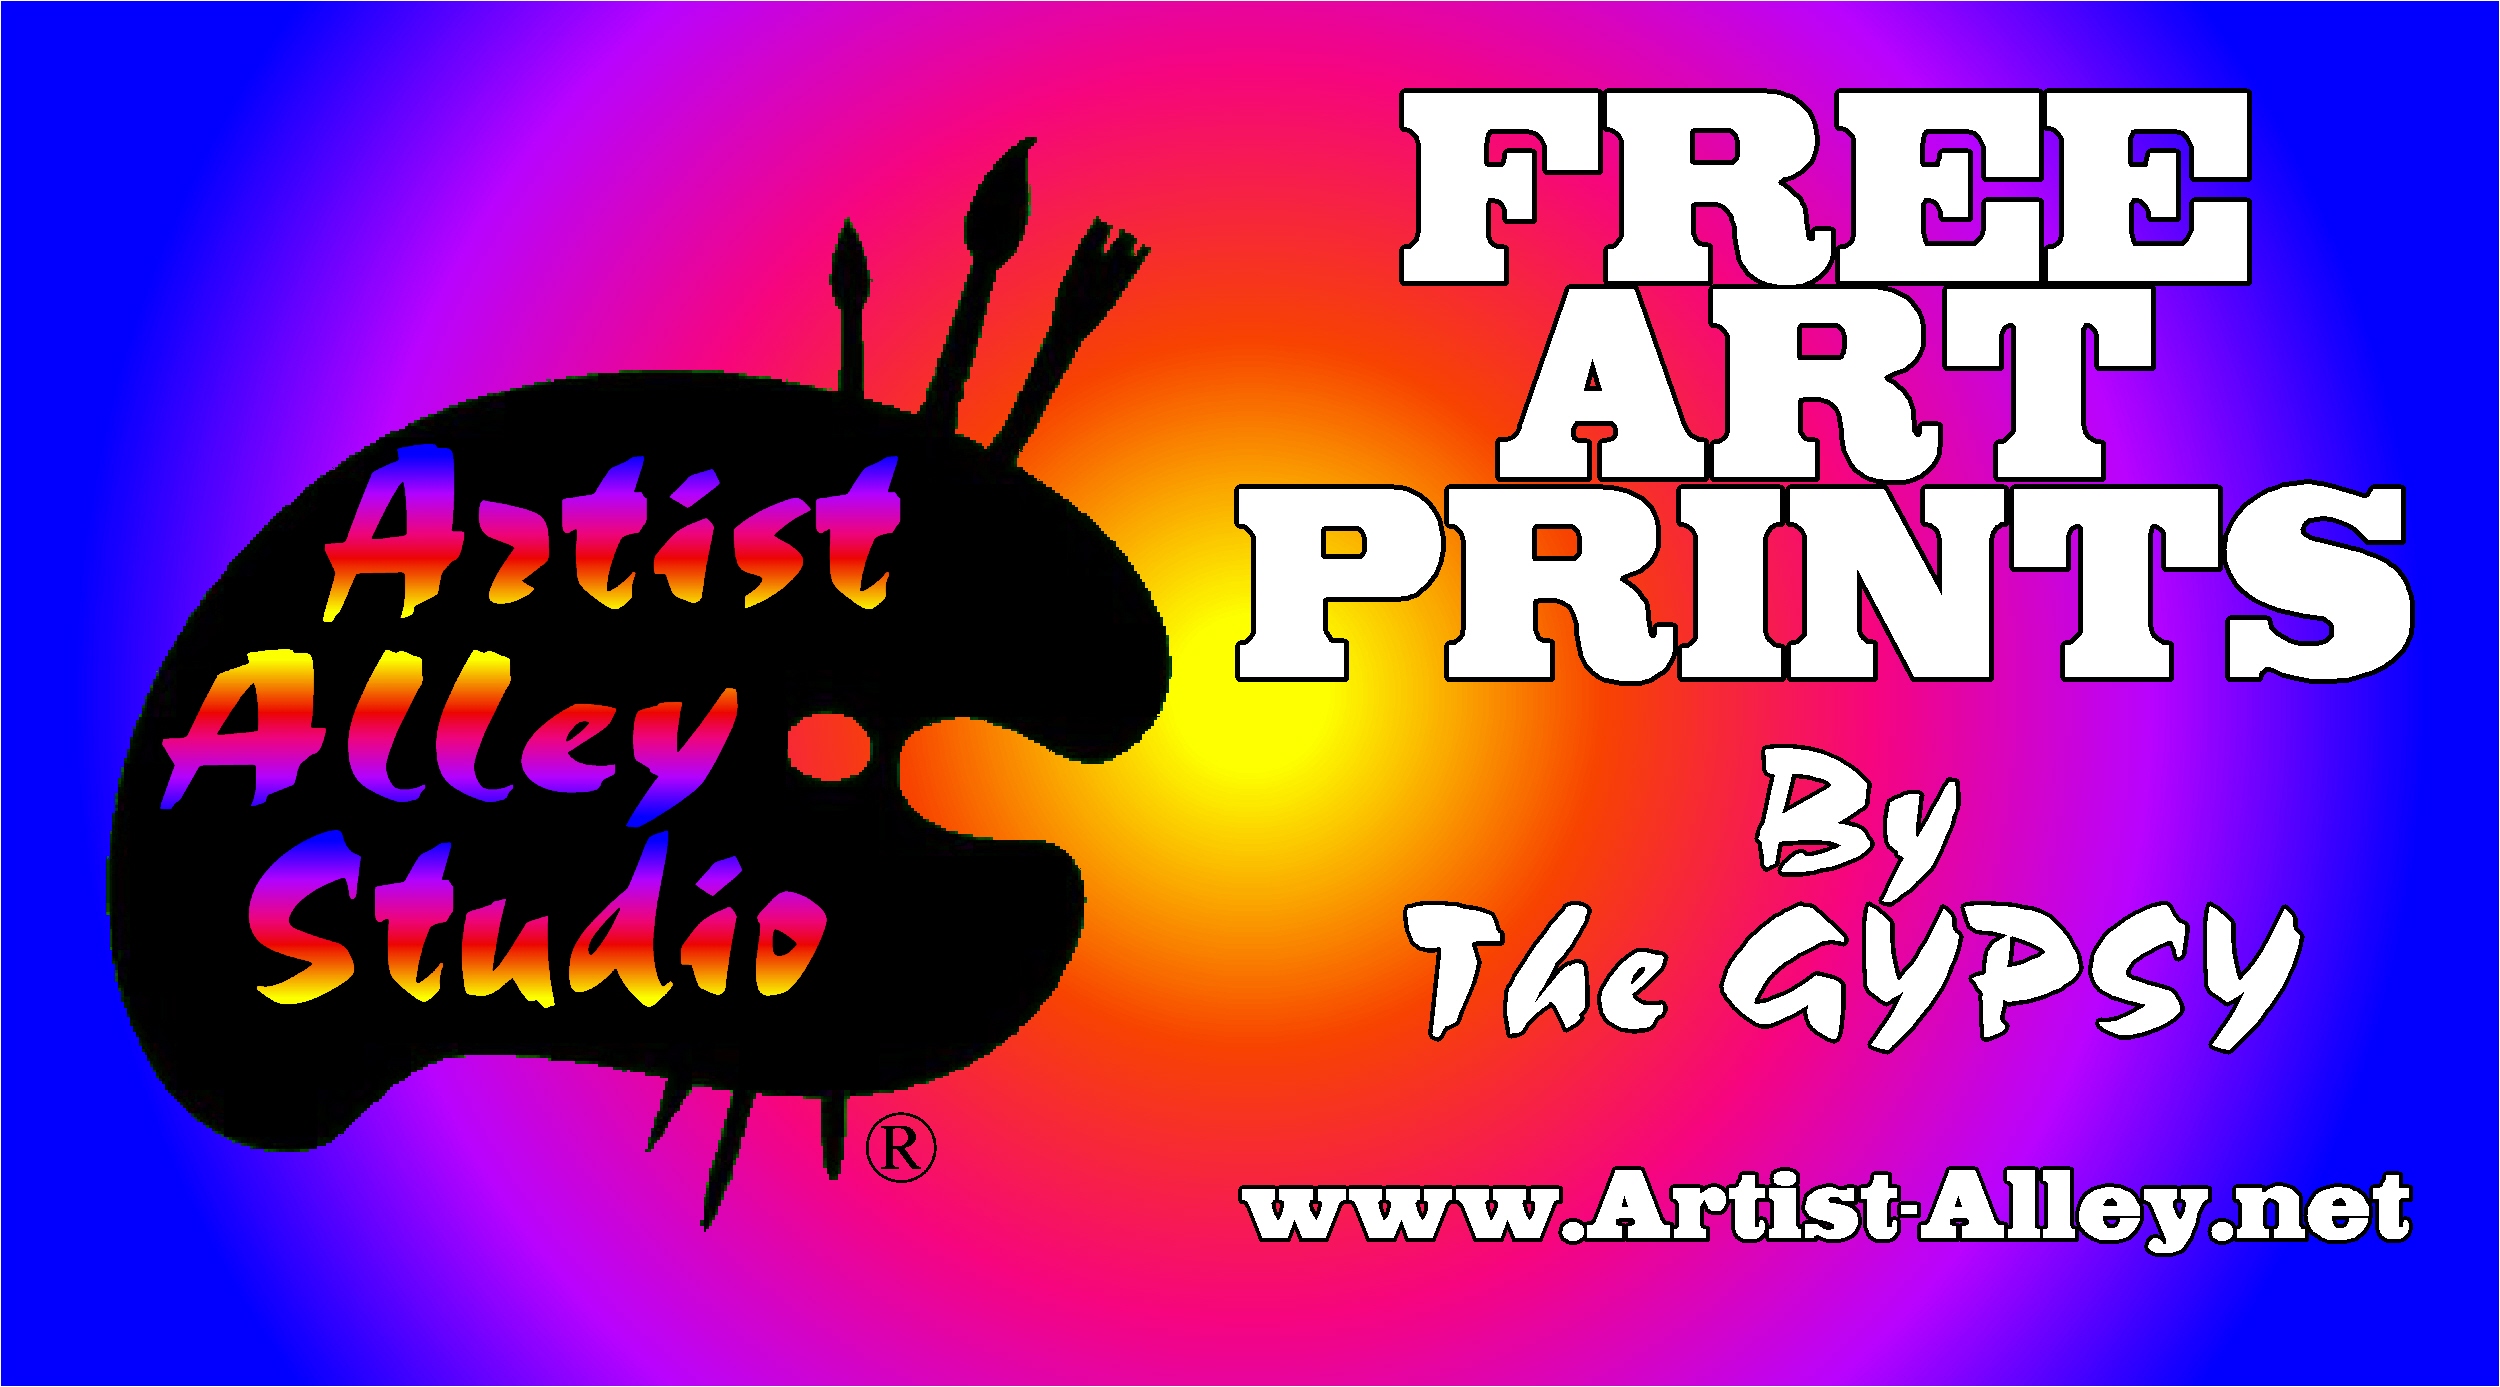 Free Art Prints By The GYPSY